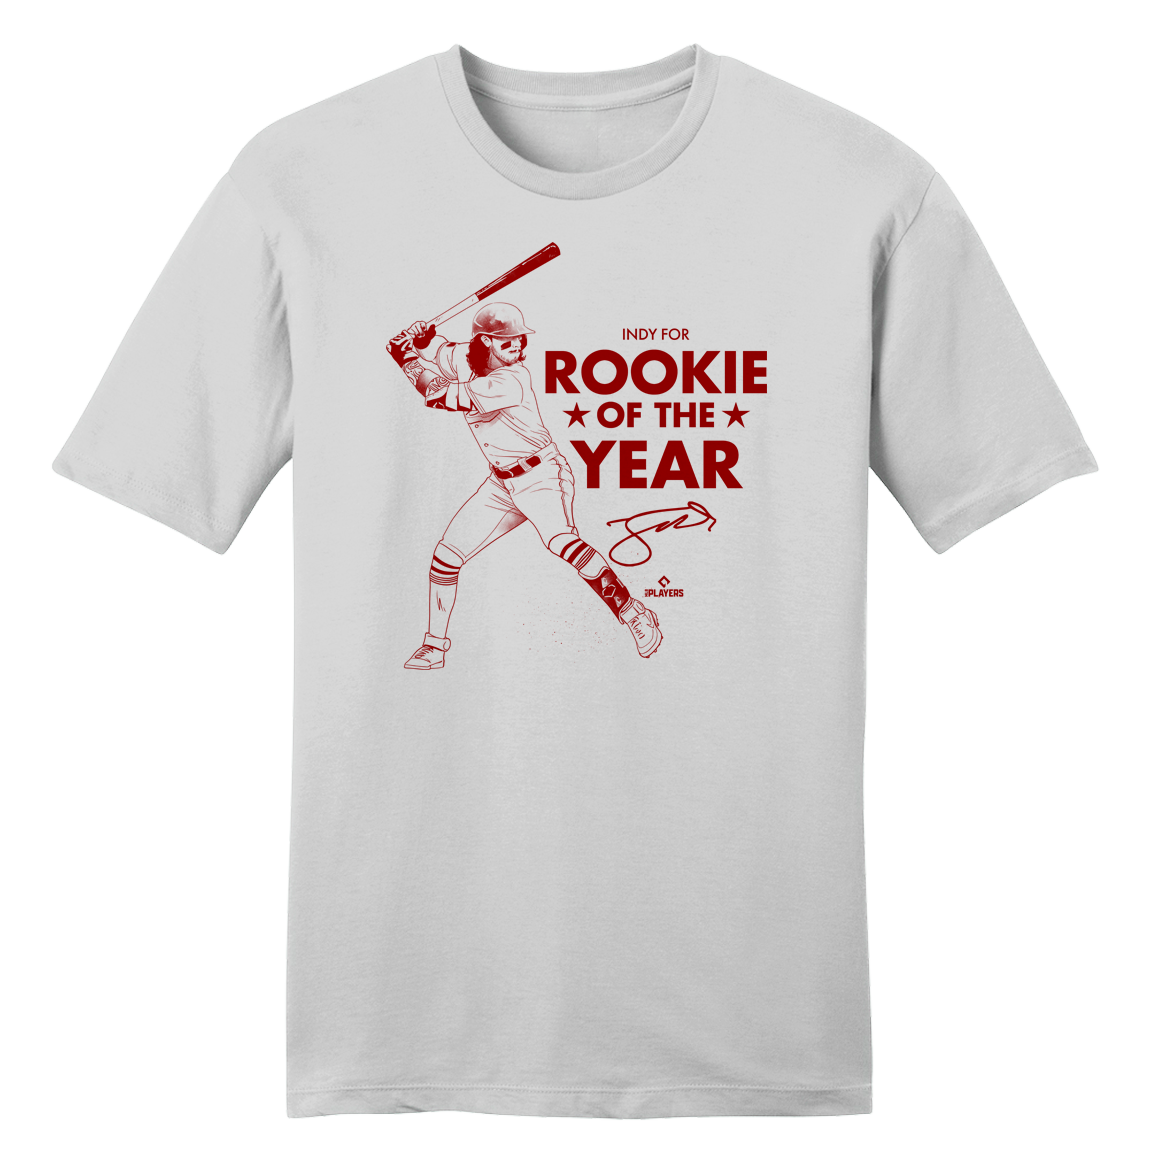 Jonathan India - Indy for Rookie of the Year MLBPA Tee